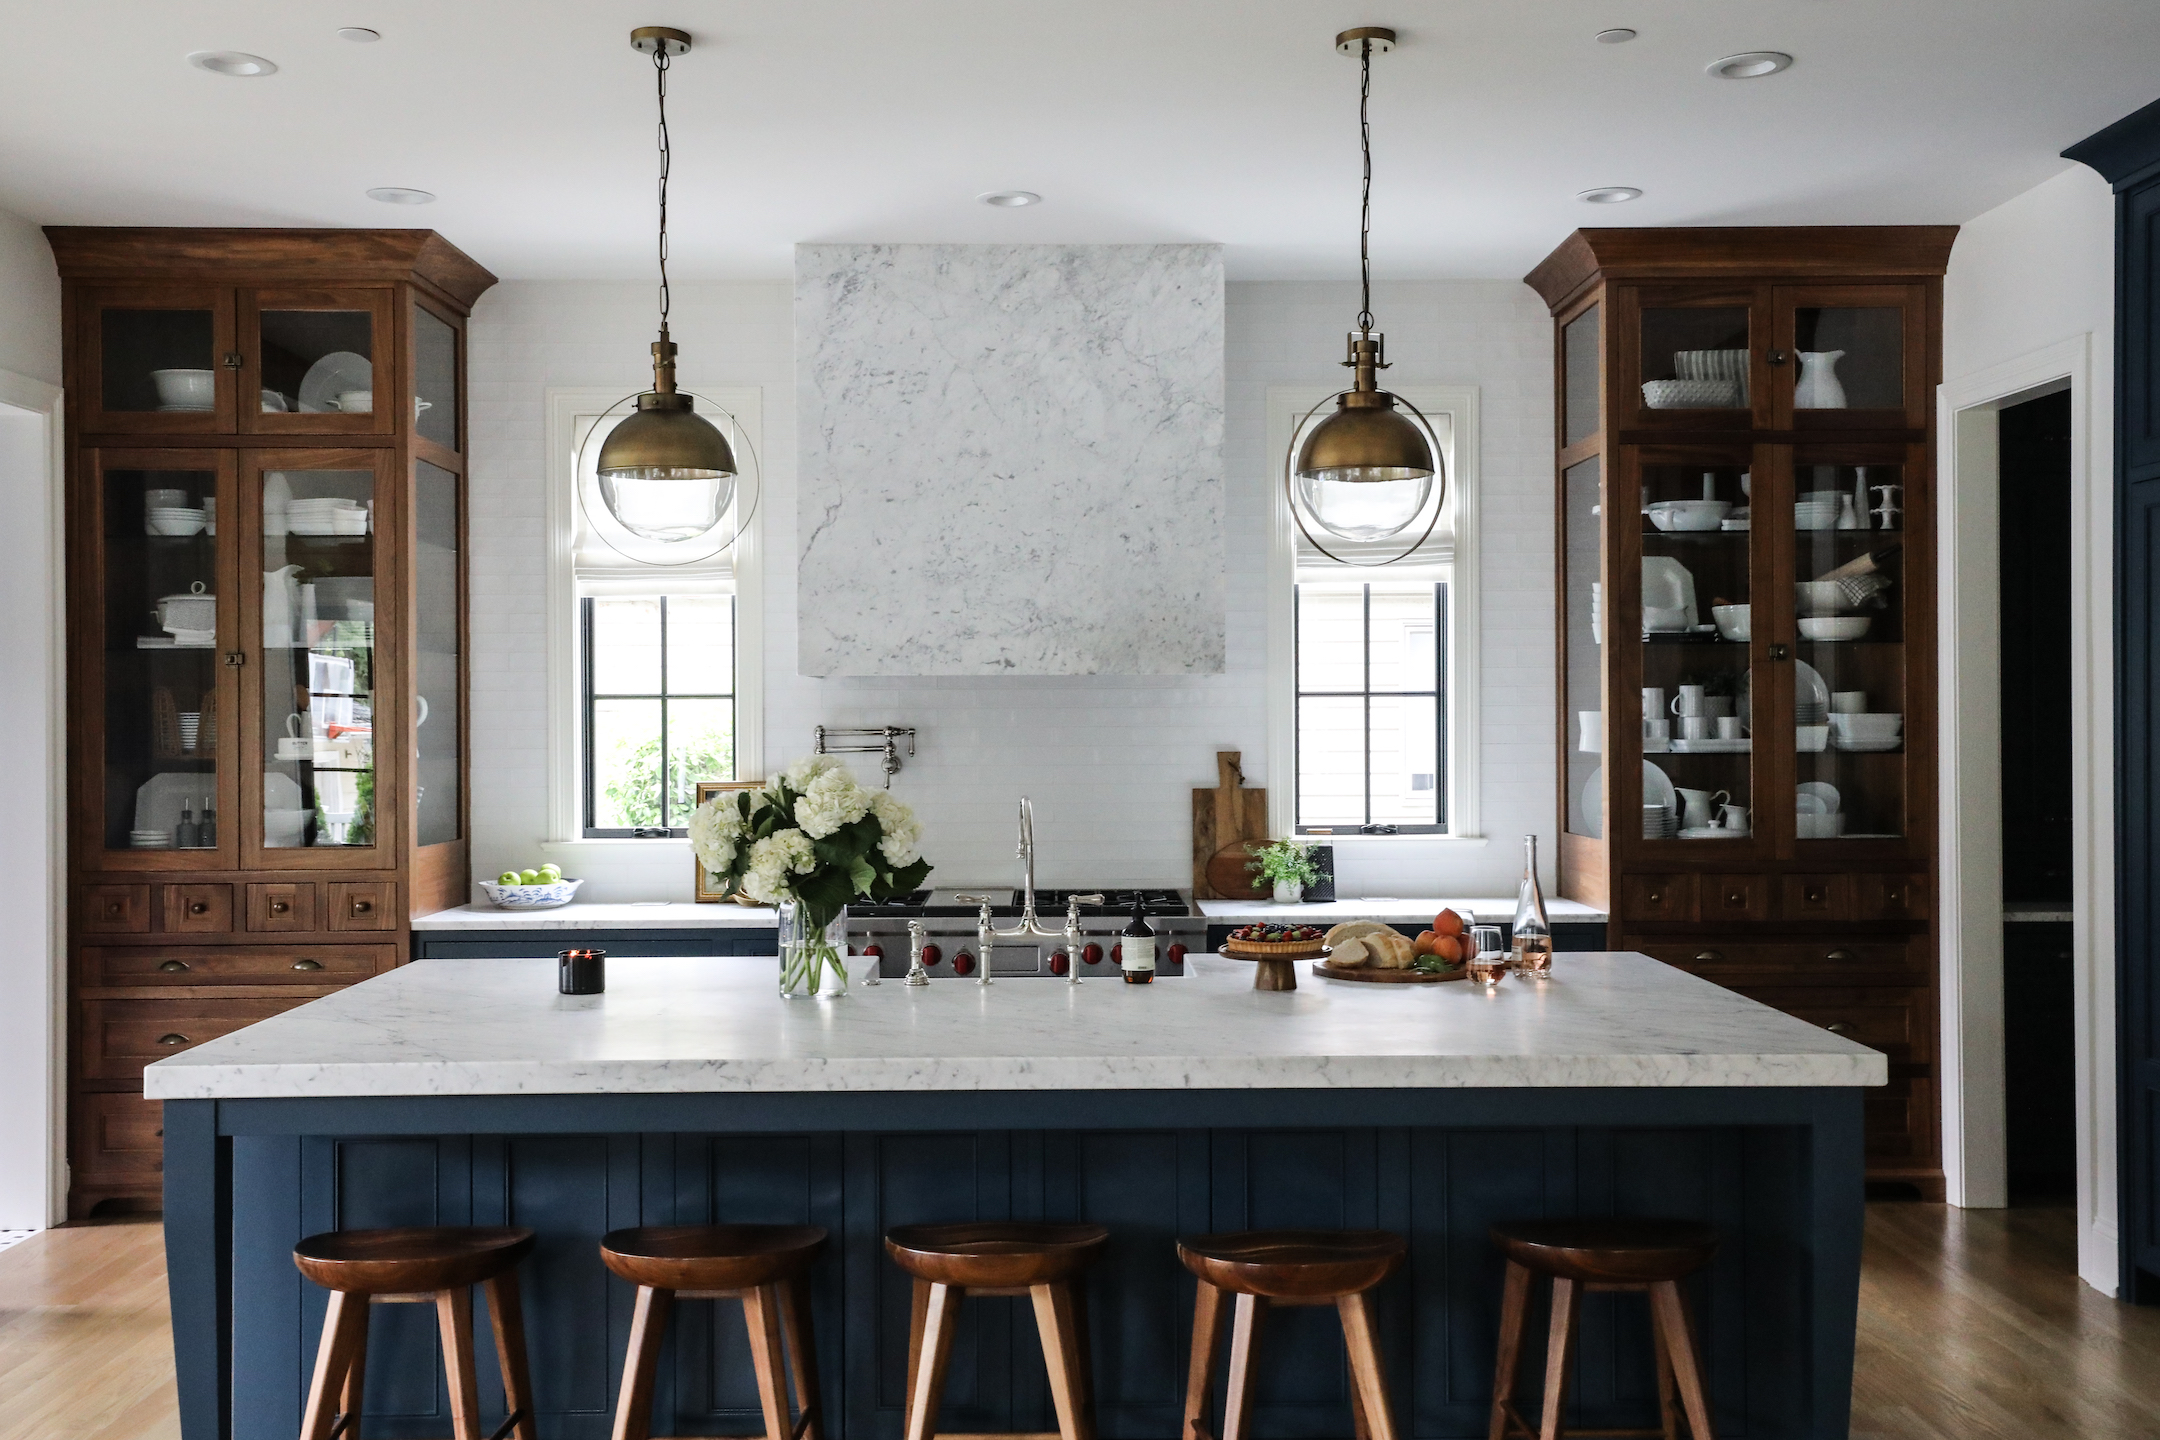 Here's How to Buy a Range and Hood for Your Dream Kitchen